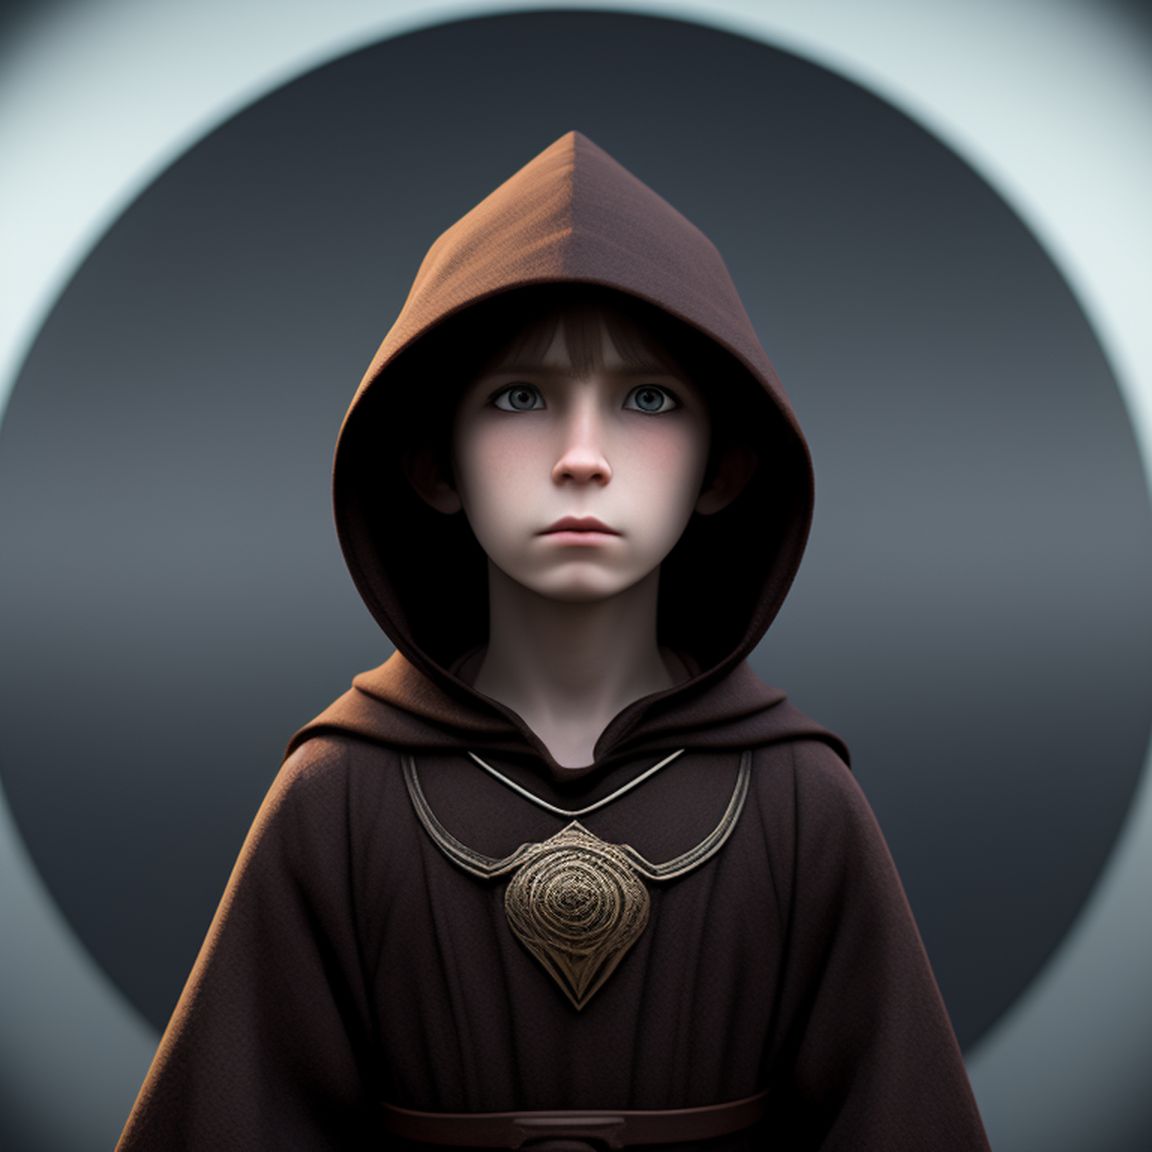 standing centered, Pixar style, 3d style, disney style, 8k, Beautiful, Wizard robes, hood, ruin, black clothing, brown hair, pale skin, brown eyes, skinny kid, apprentice sorcerer, estonian folk aesthetic, nordic fantasy, skyrim inspired, ominous shadows, expression would, cold expression , lonely child, Brown eyes, dark brown short spikey hair, anime style, magician clothes